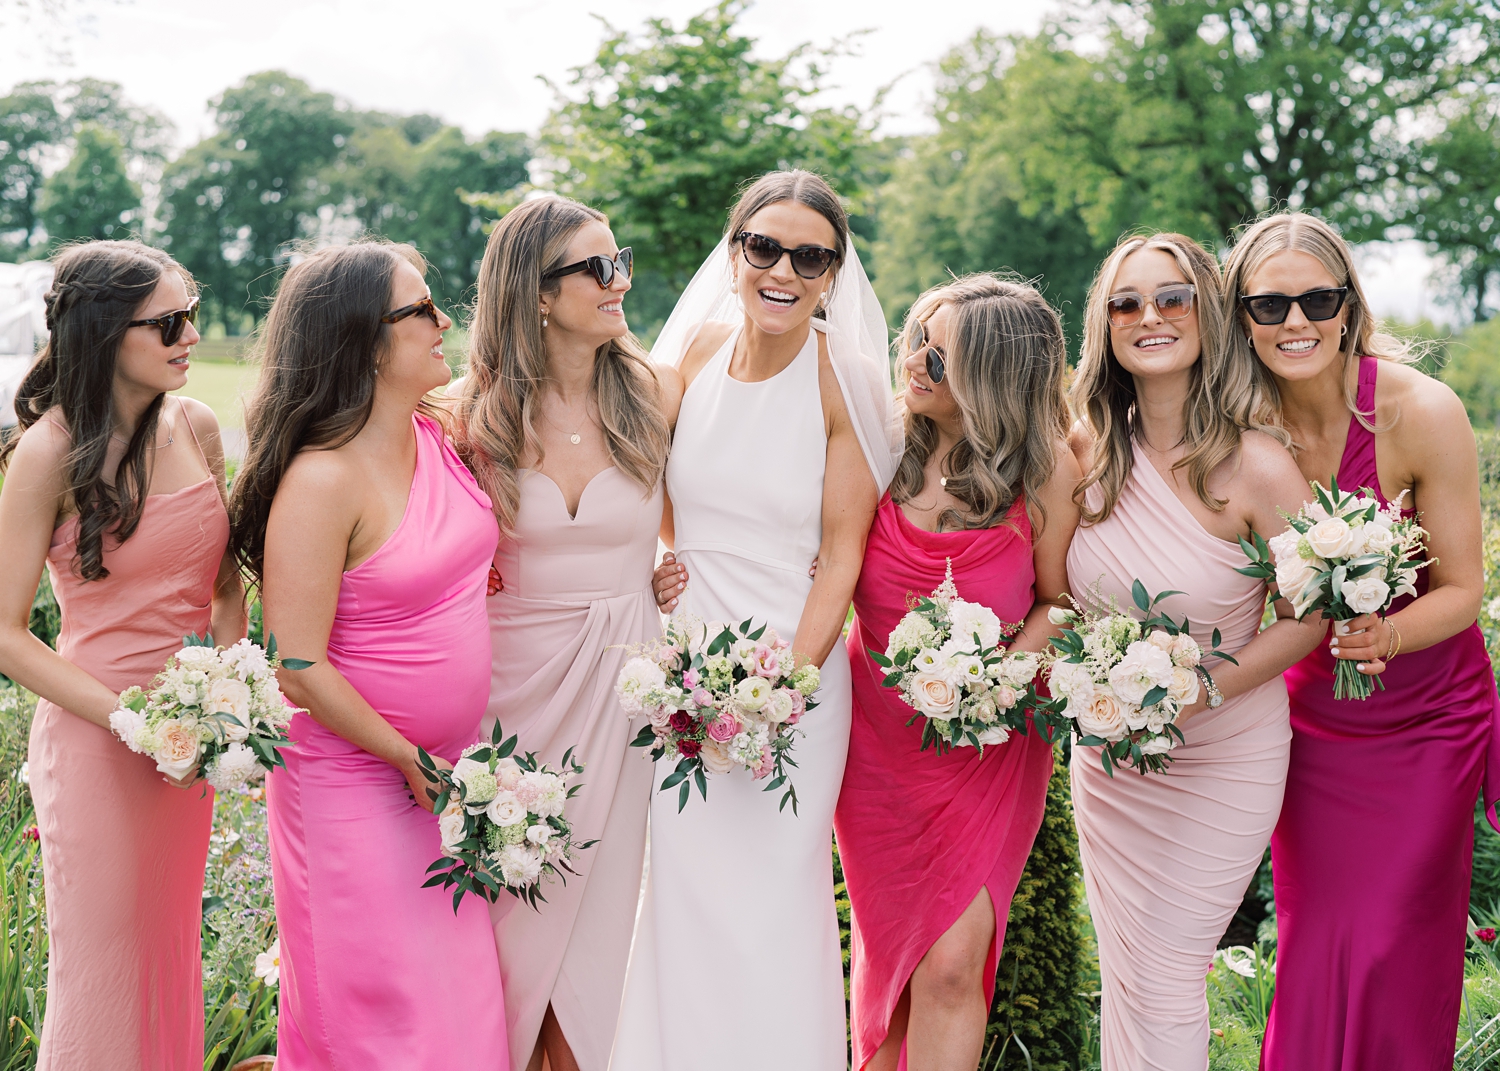 Bride and her bridesmaids styling sunglasses together on her summer wedding day at Tankardstown House.